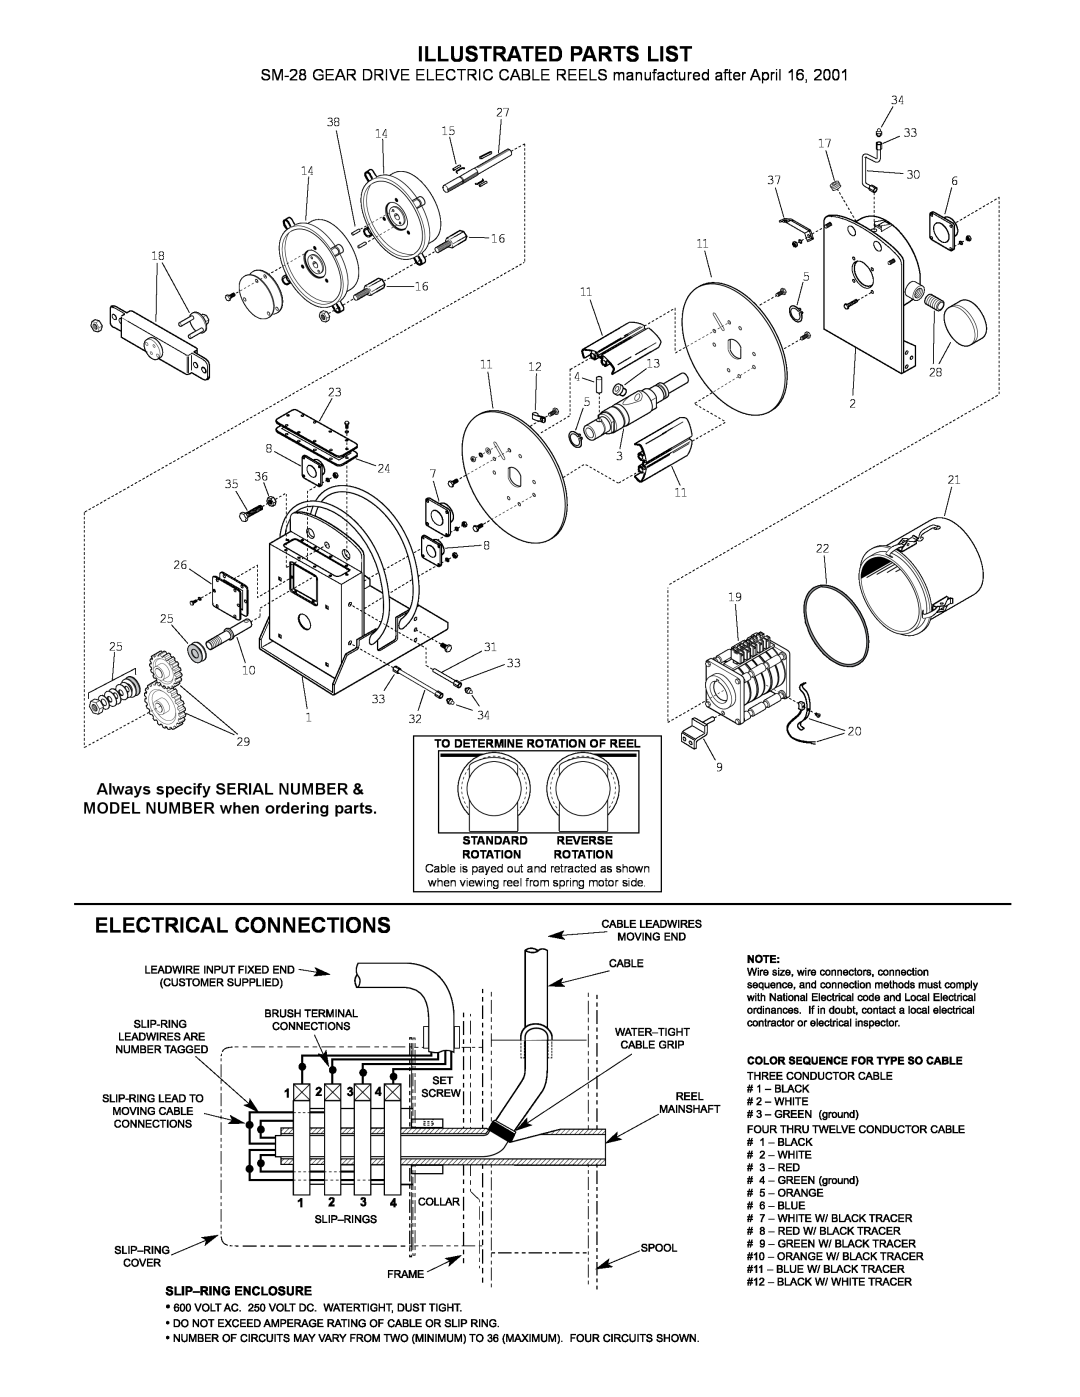 Hubbell SM-28 manual Illustrated Parts List, Electrical Connections, To Determine Rotation Of Reel Standard Reverse 